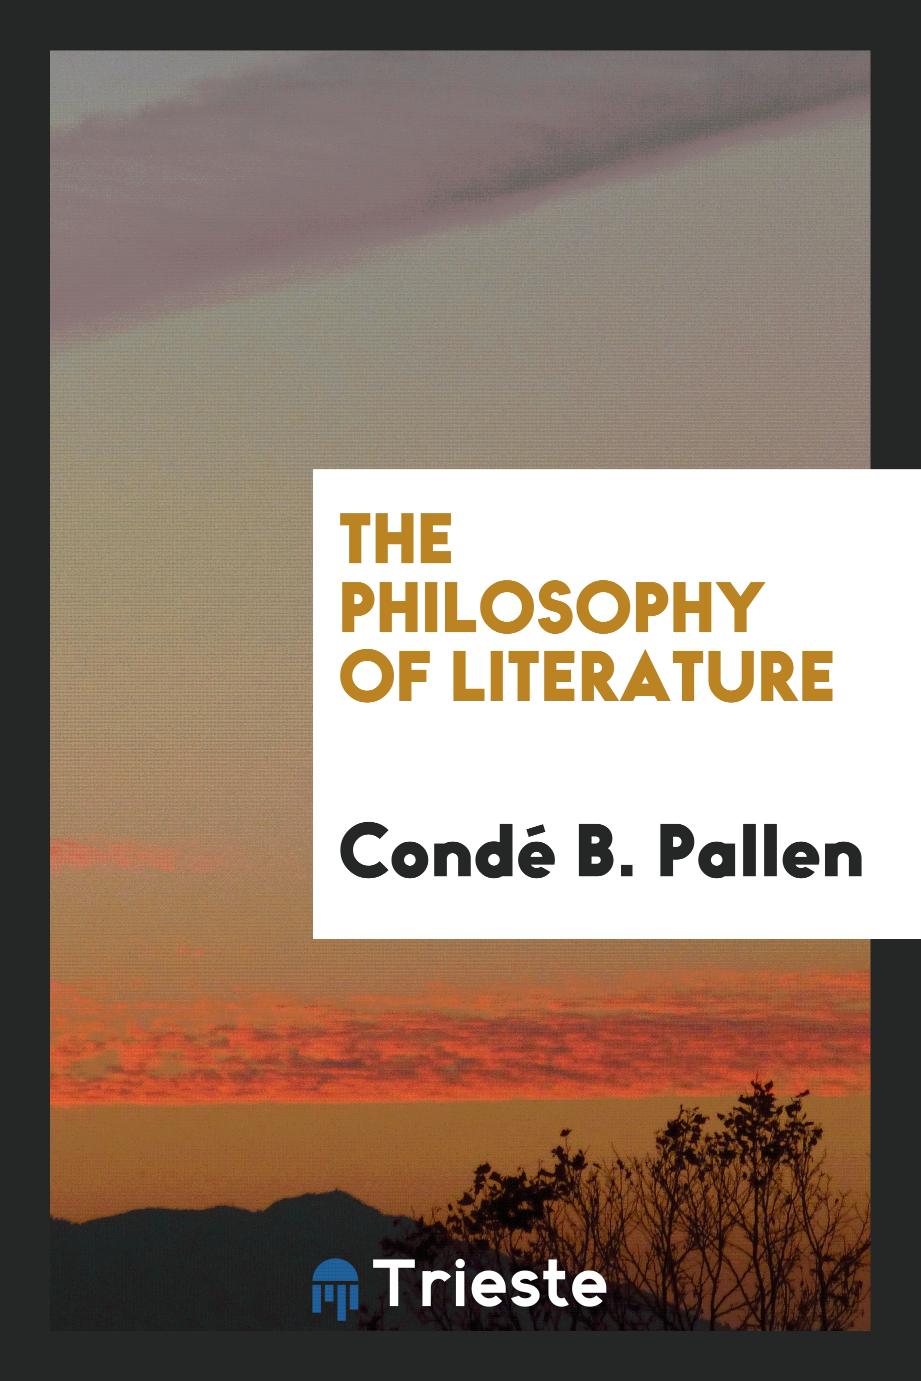 The philosophy of literature